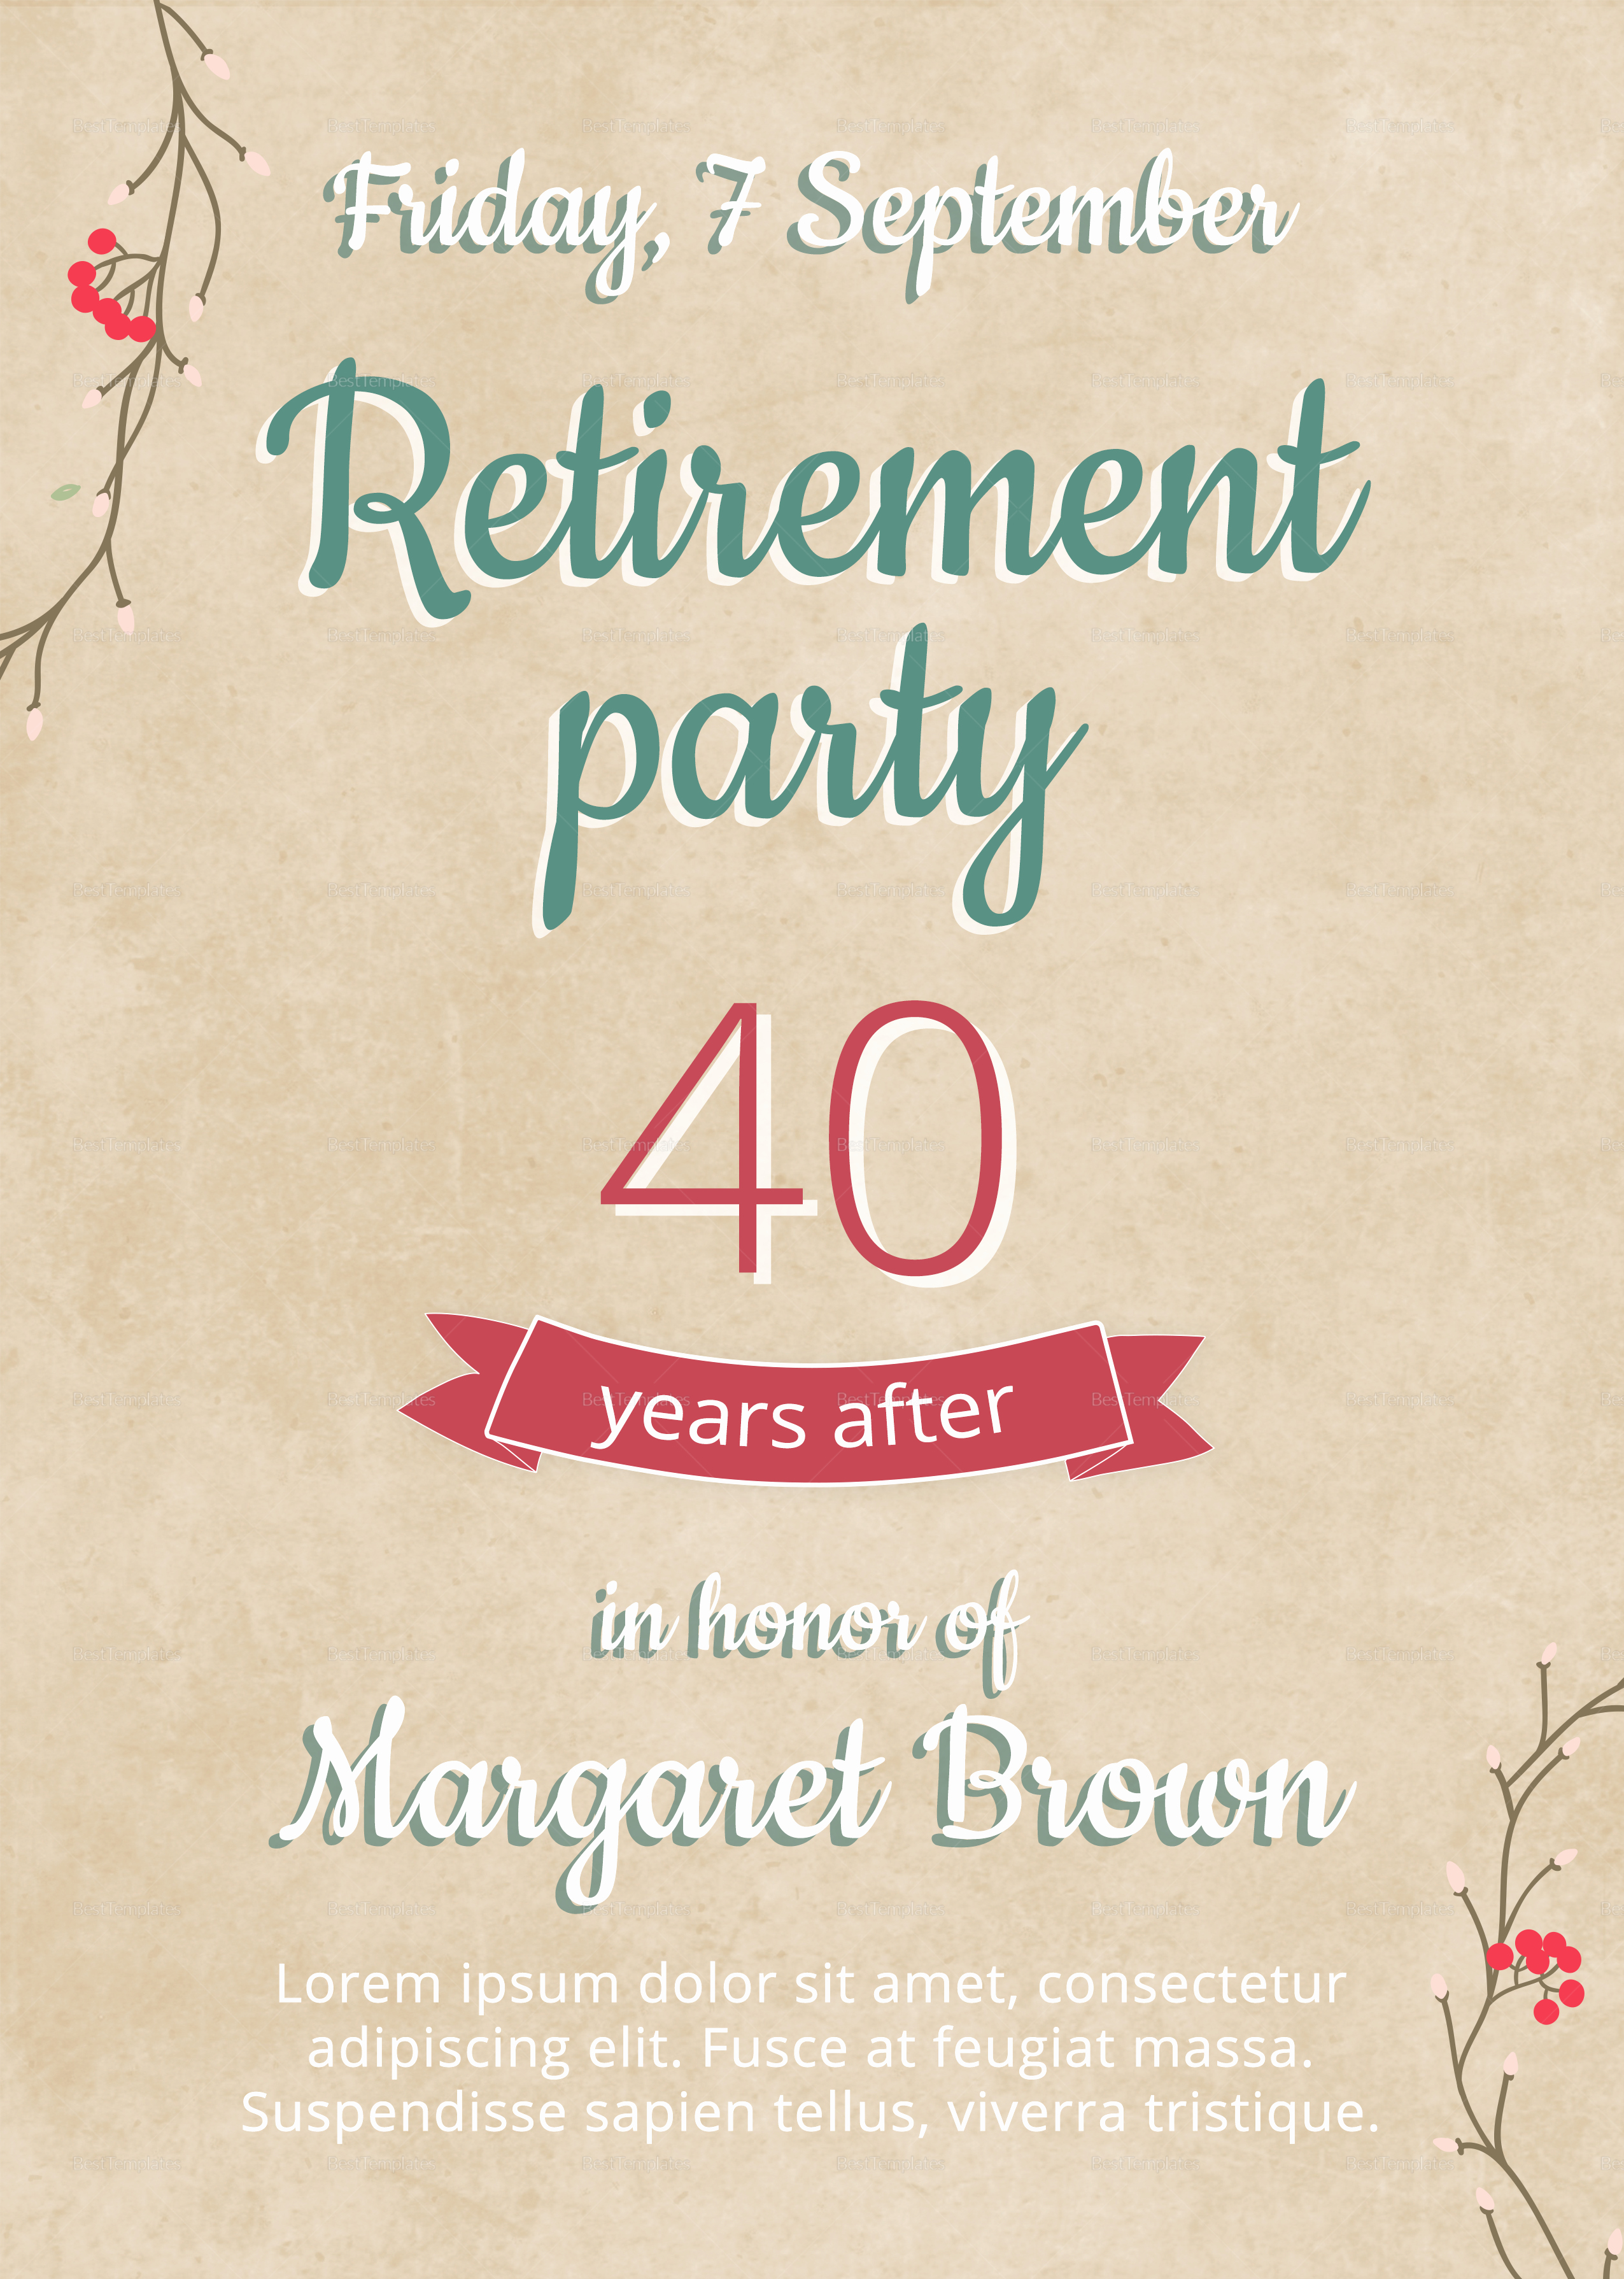 Retirement Flyer Free Template Best Of Retirement Party Flyer Design Template In Psd Word